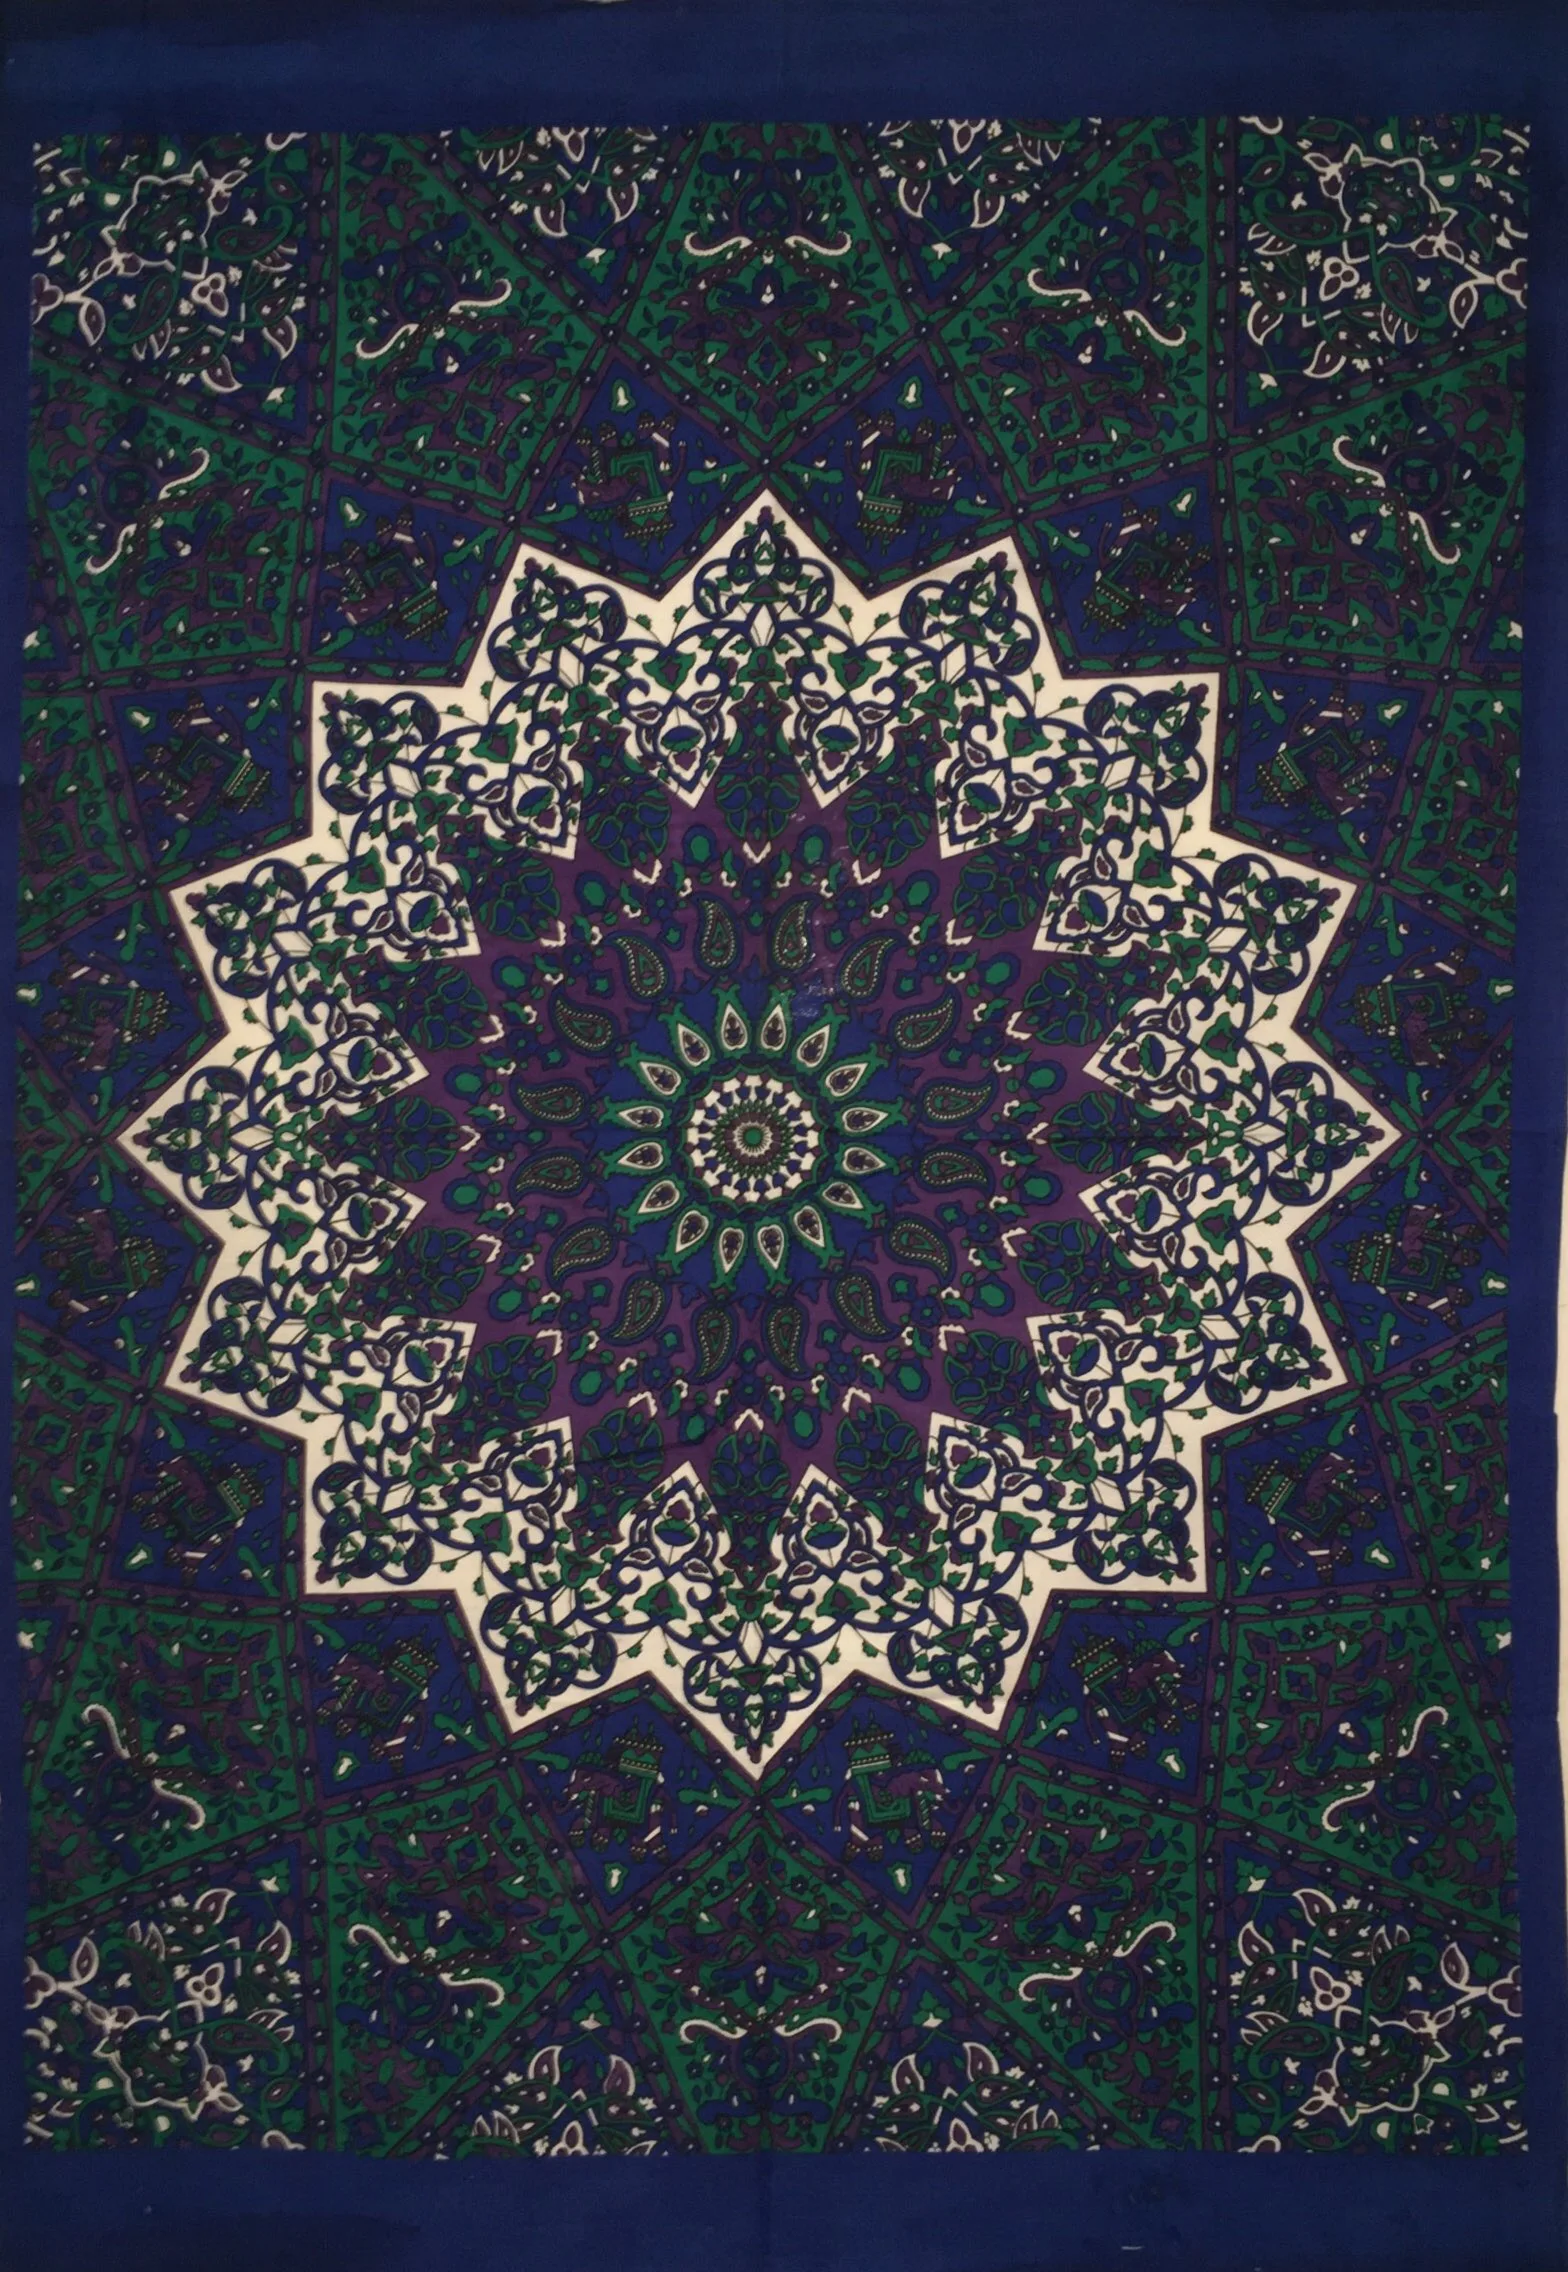 Elephant Mandala Design Small Poster Wall Hanging Tapestry Cotton Fabric Ethnic 